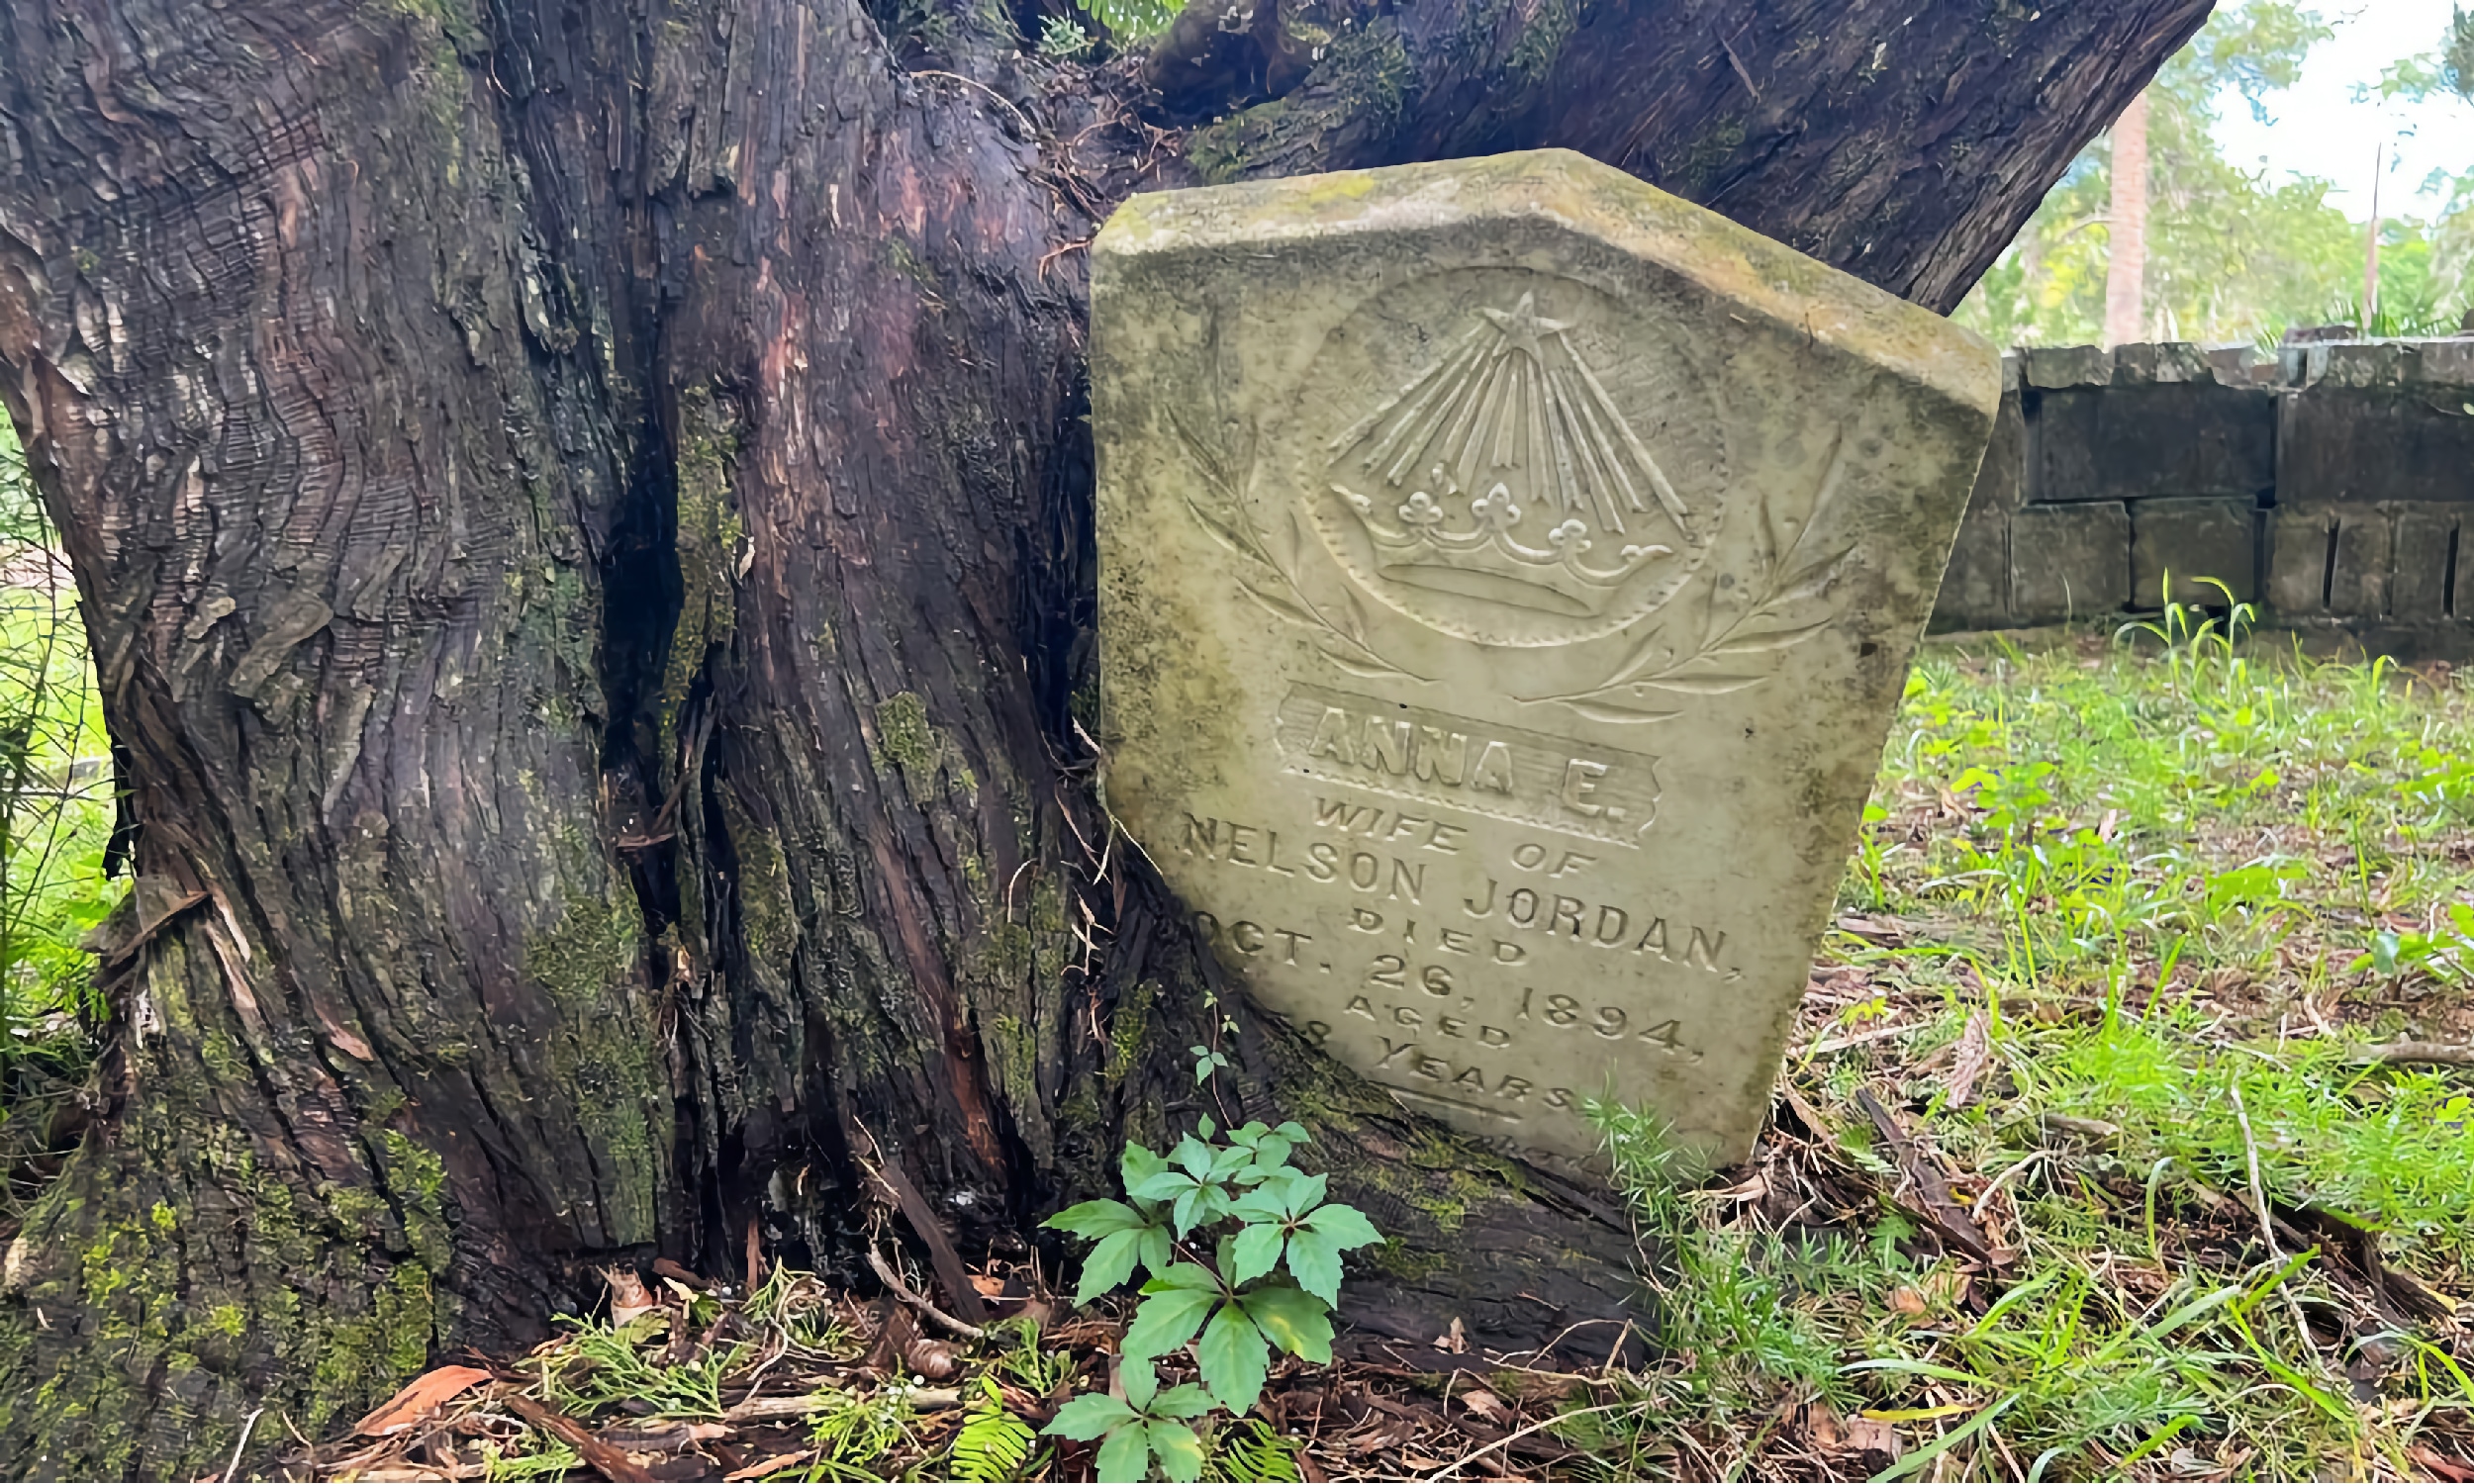 A gravestone from the late 1800s, that has been encased in a tree's root